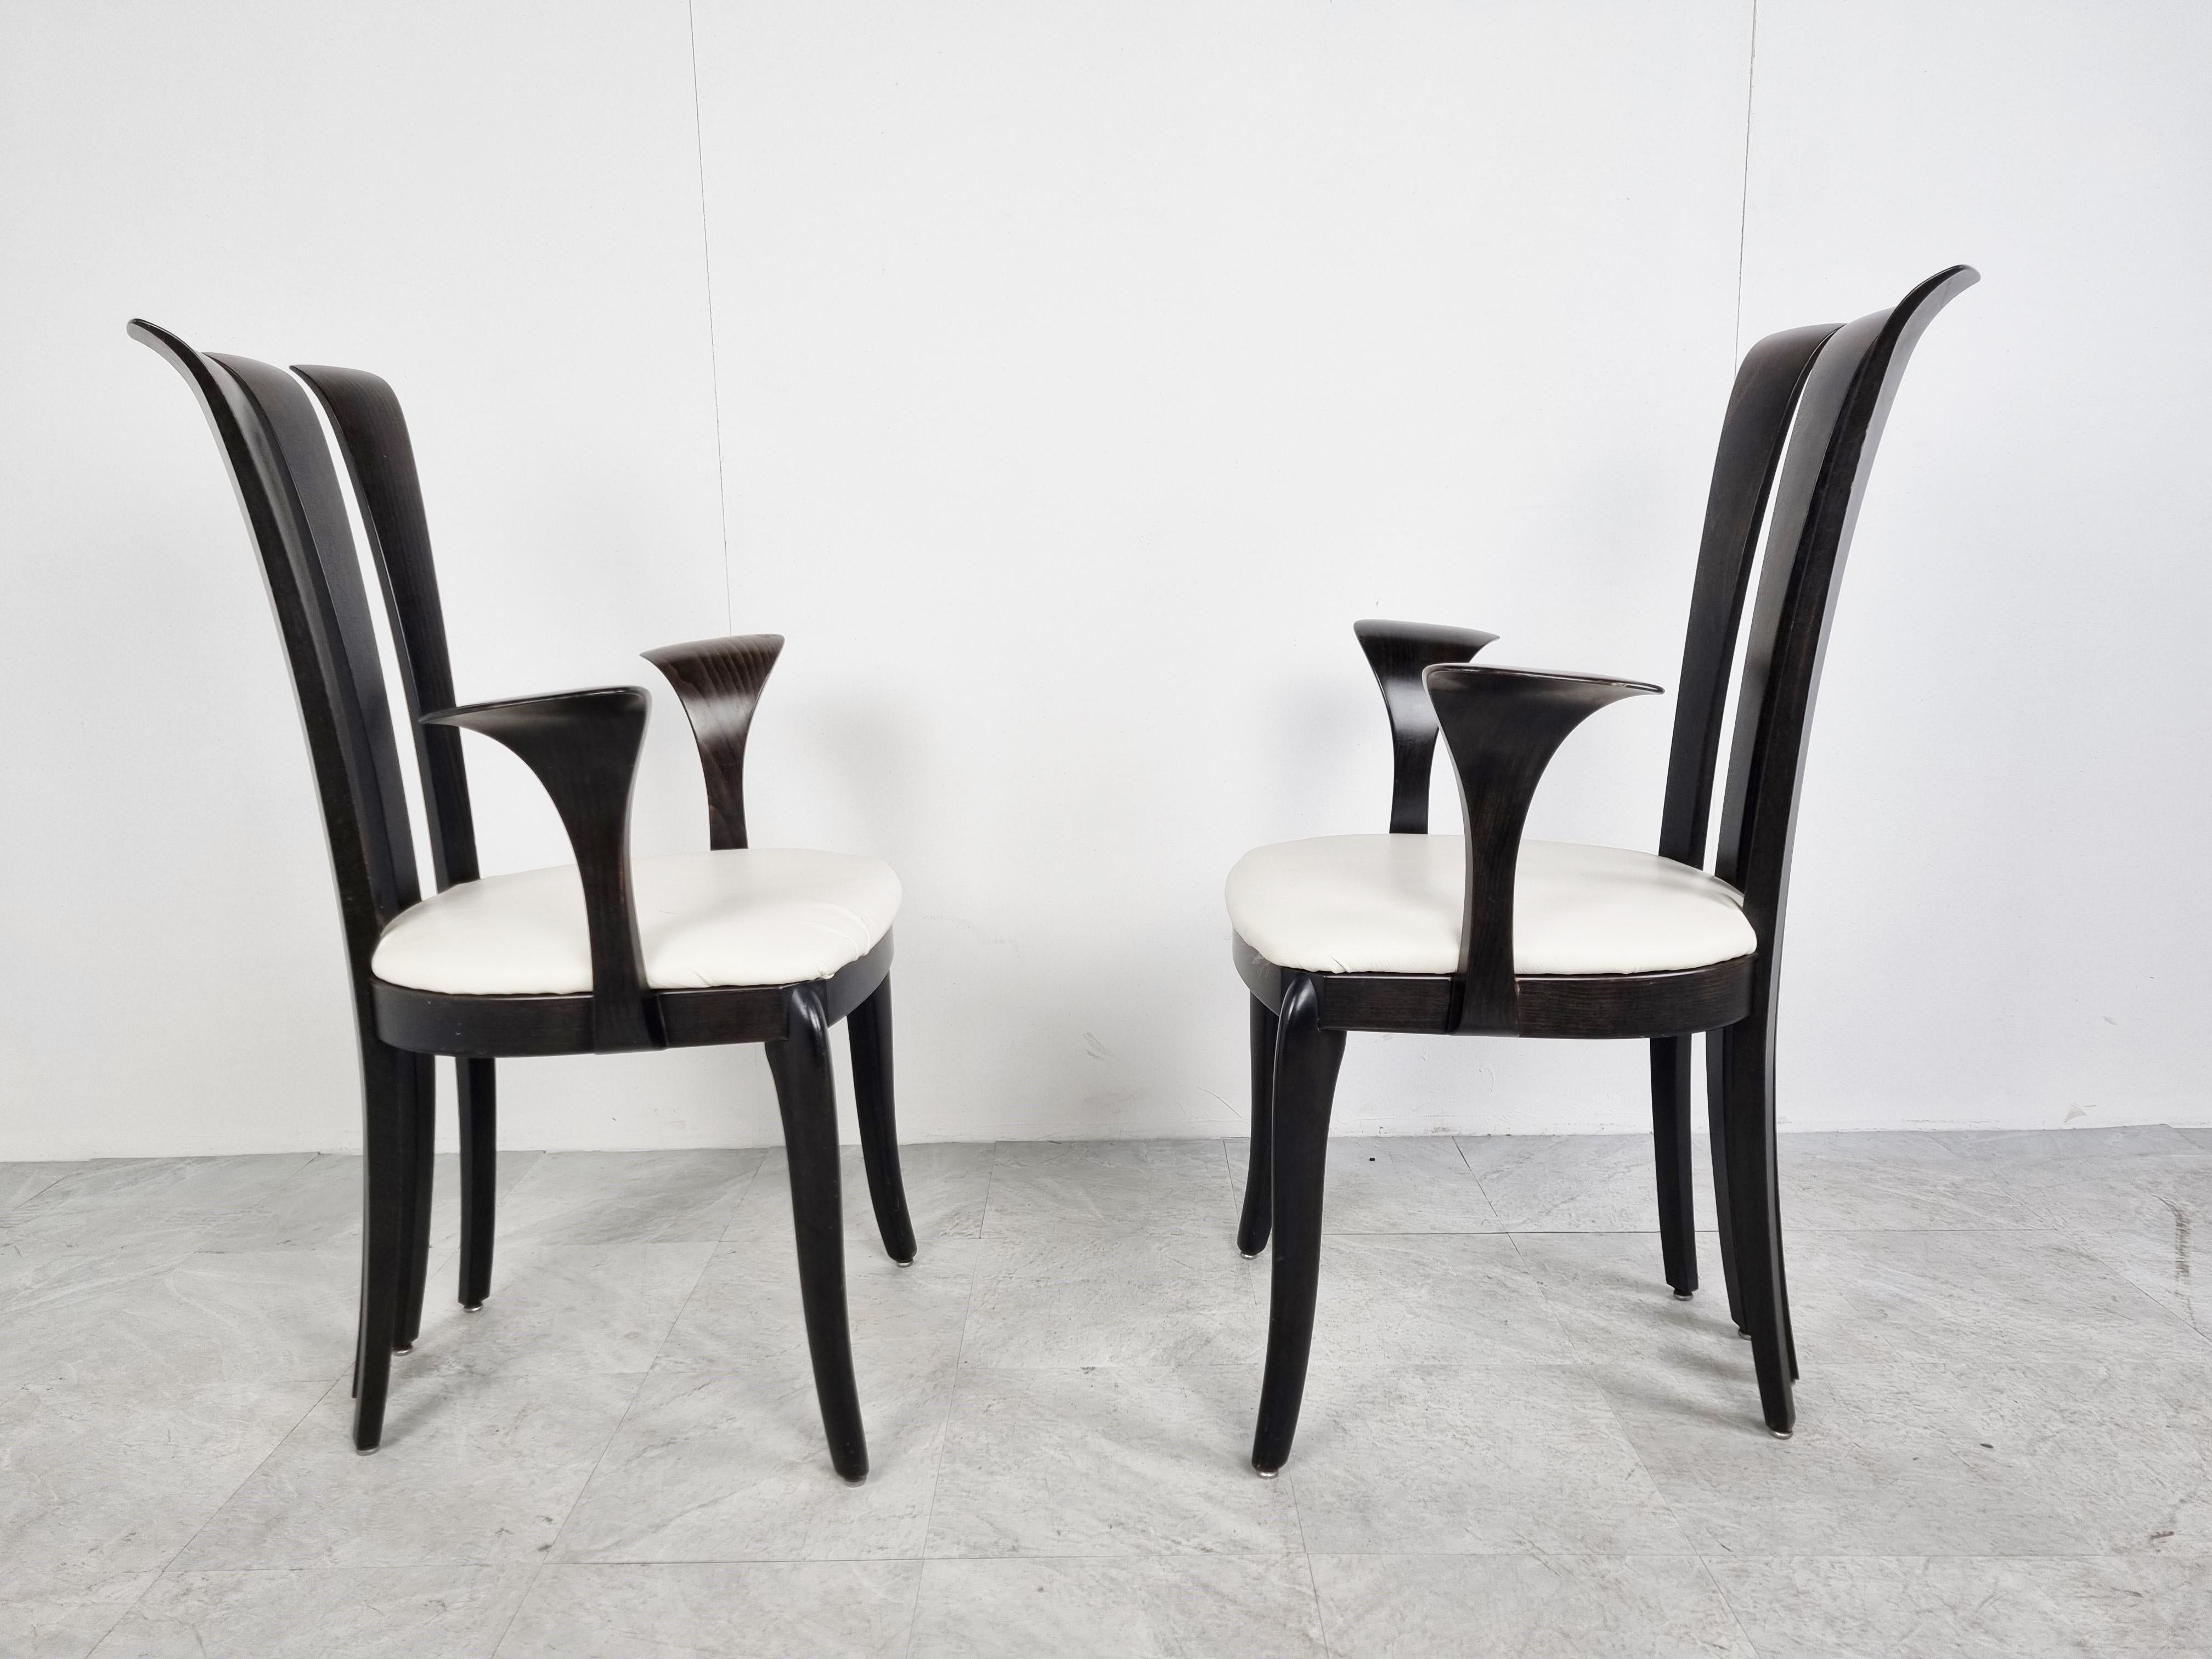 Lacquer Sculptural Italian Armchairs by Sibau, 1990s